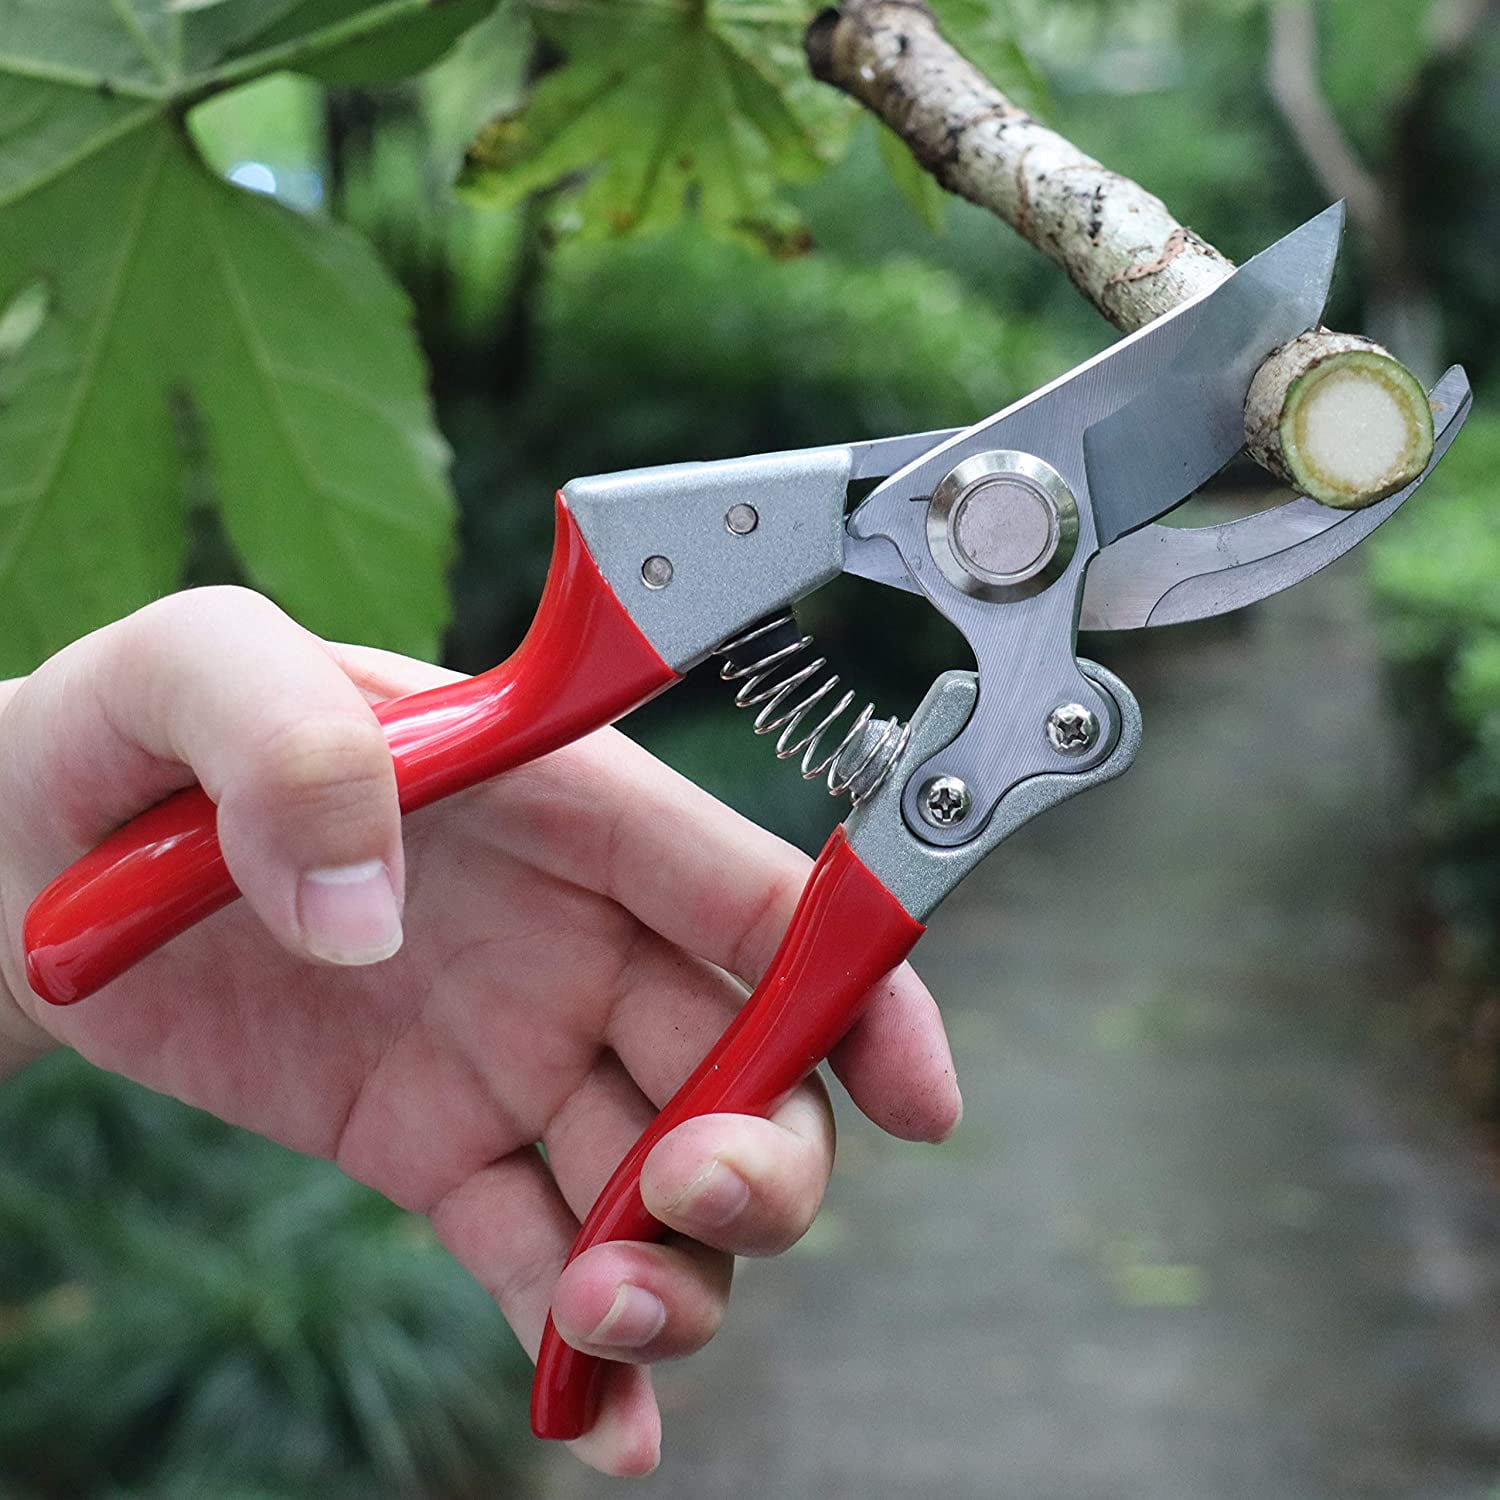 Pro Bypass Pruning Shears Hand Pruner Secateurs Garden Clippers Fast and Sharp 